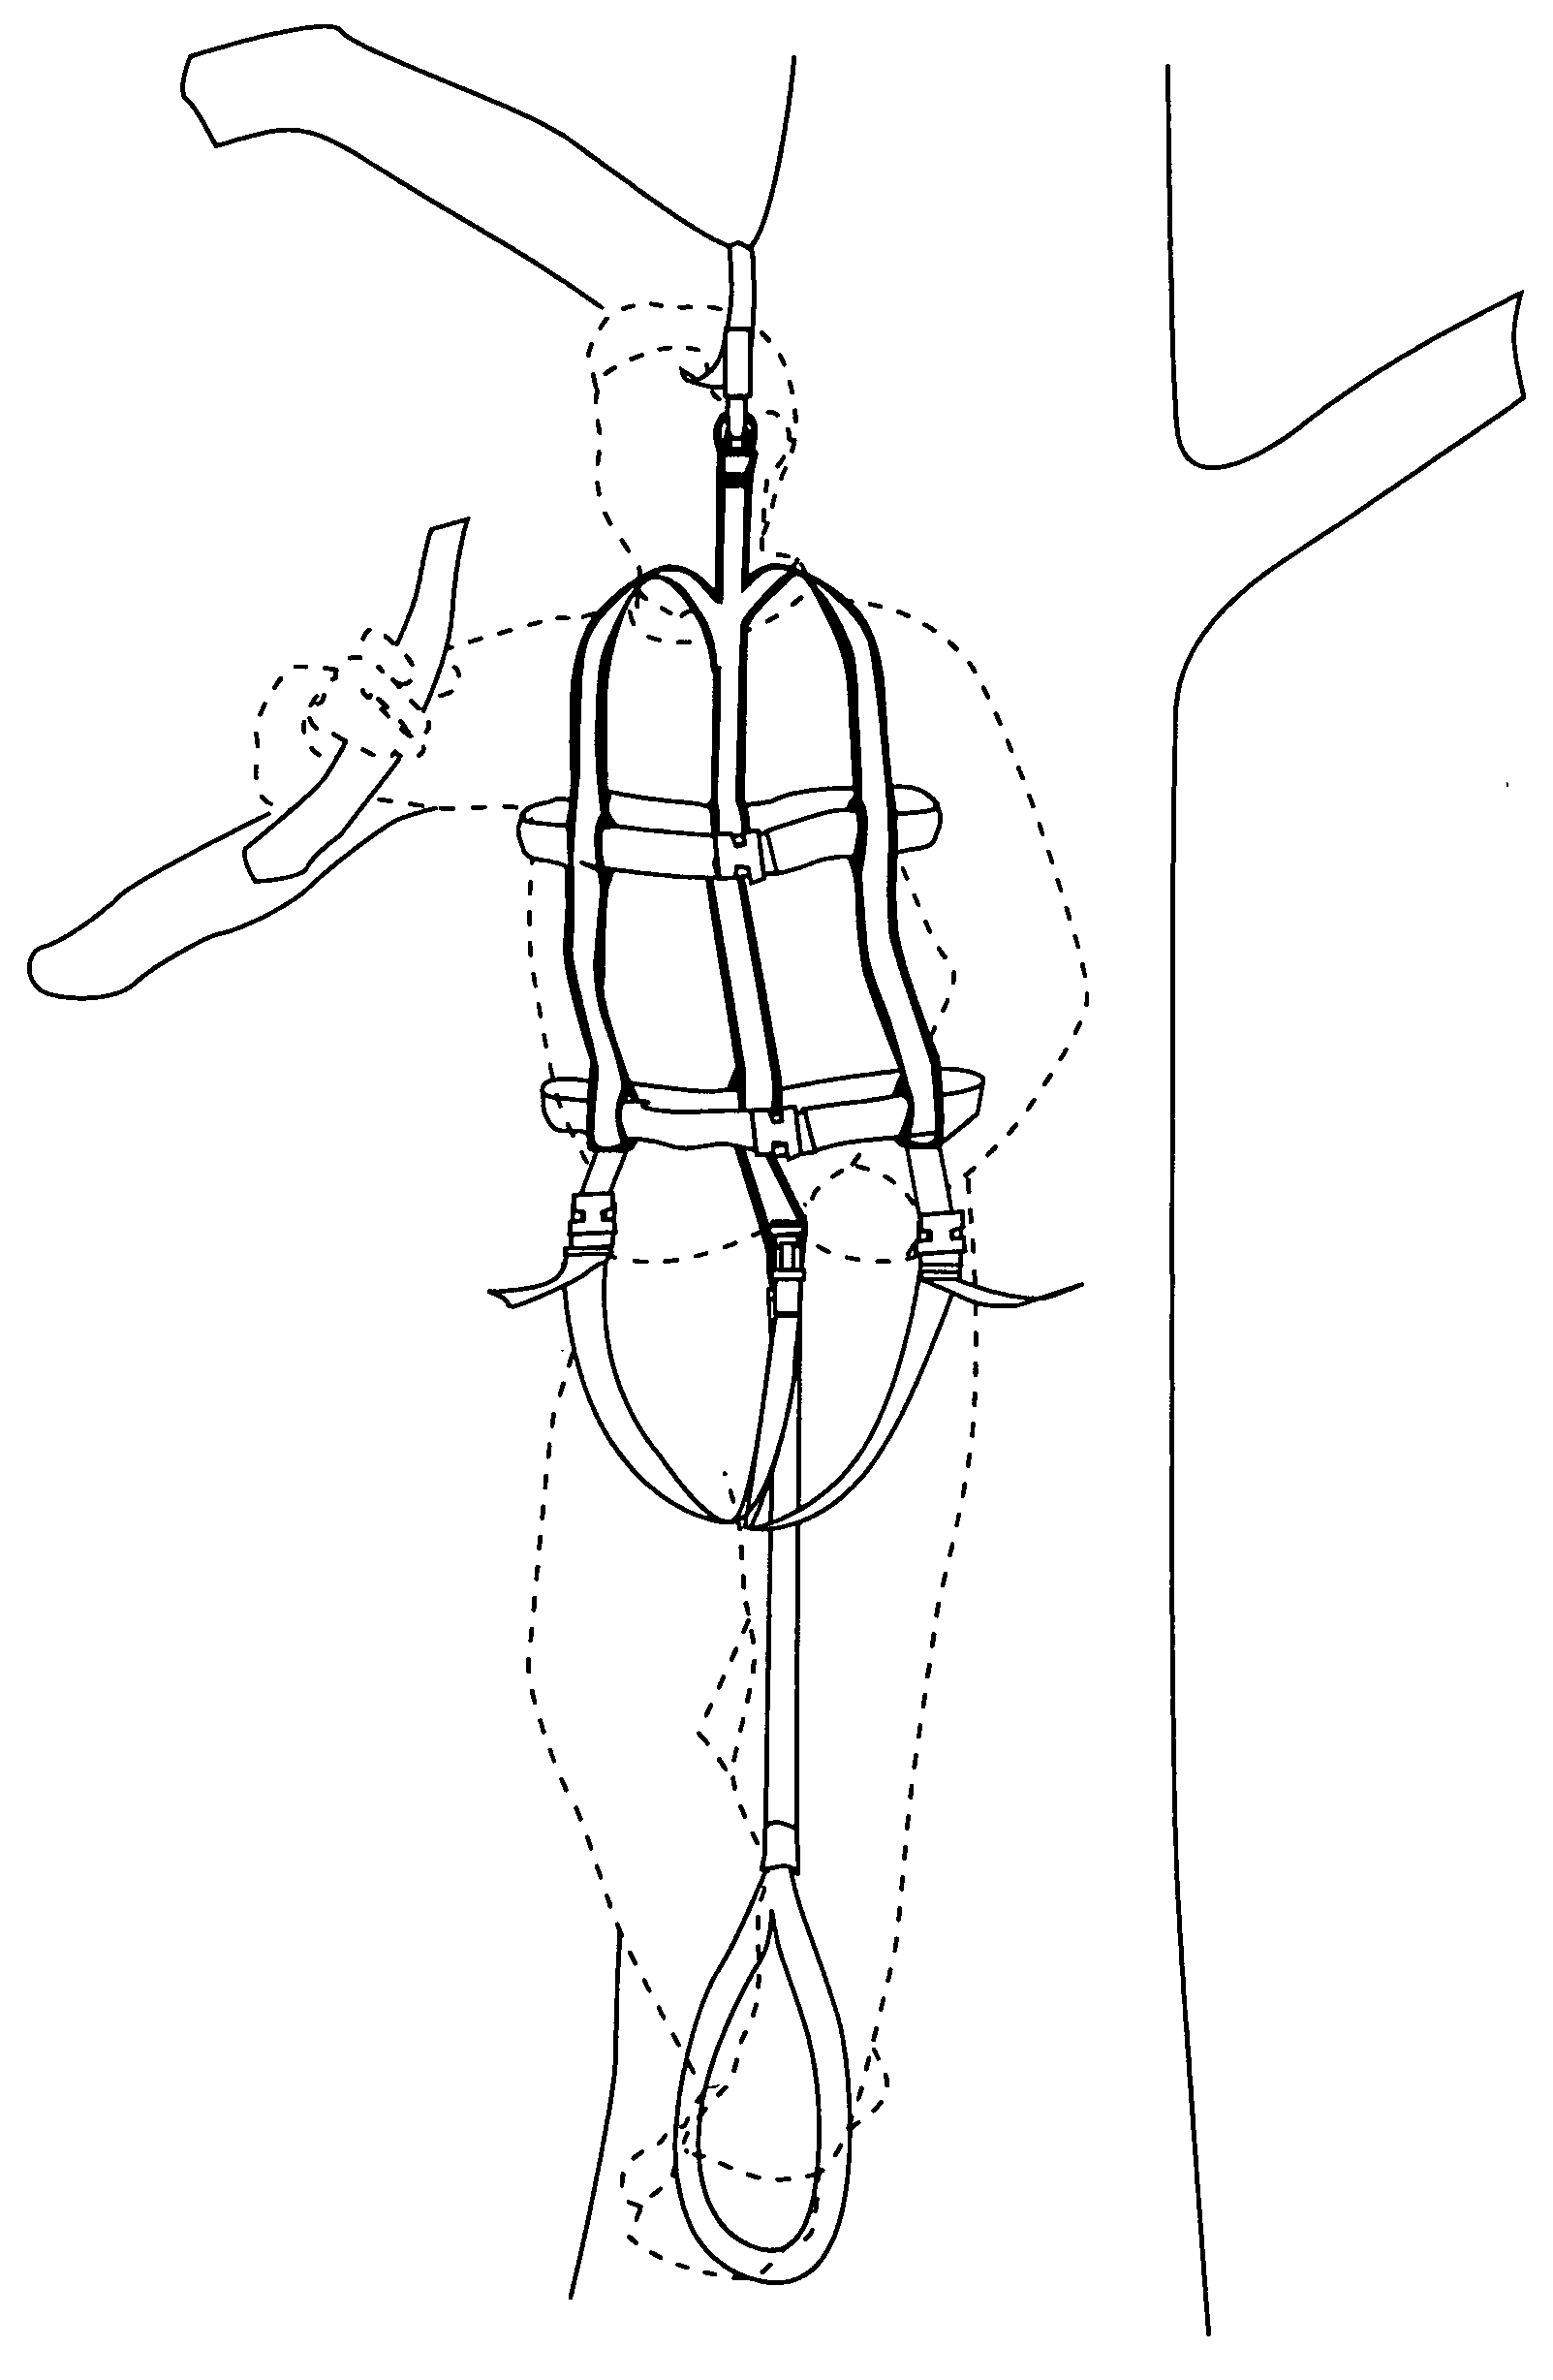 Safety harness with suspension relief